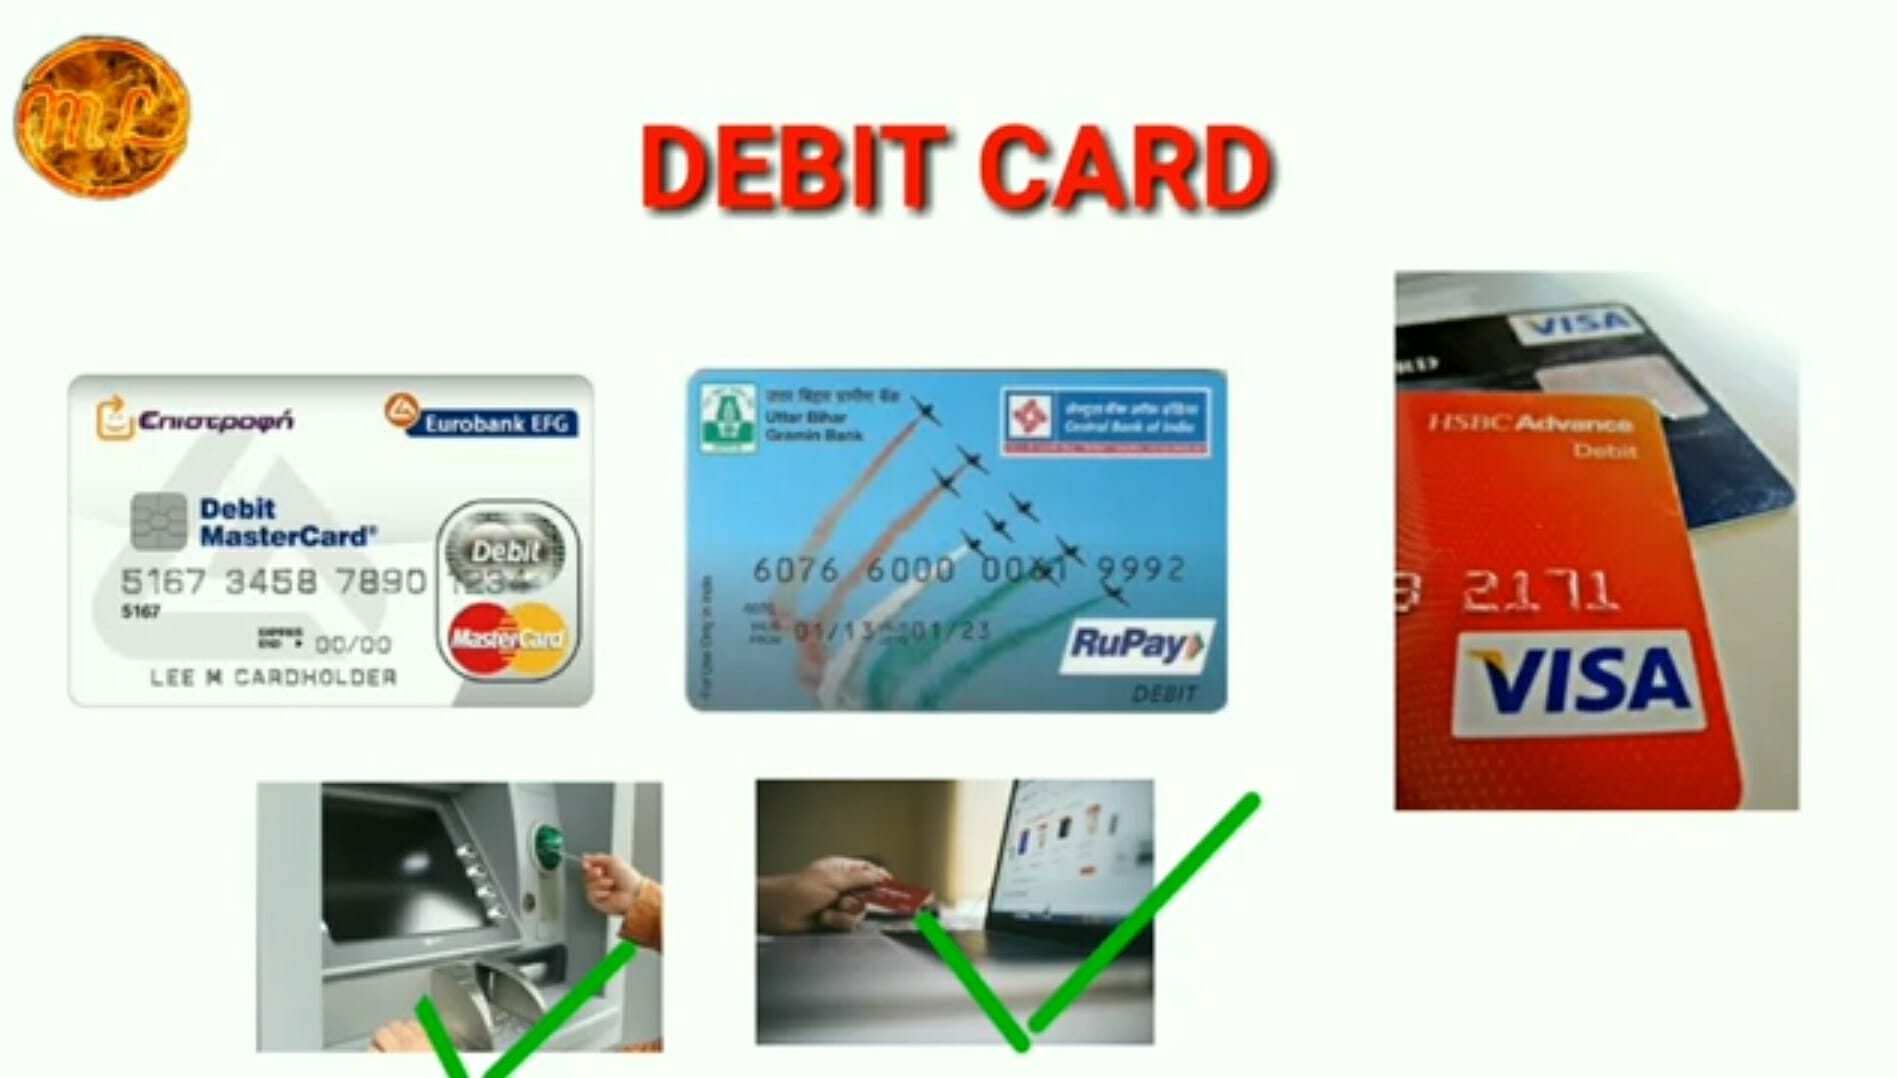 Debit Card and credit Card различия. Атм кард. Smart Card vs Debit Card. Credit and Debit Card difference.